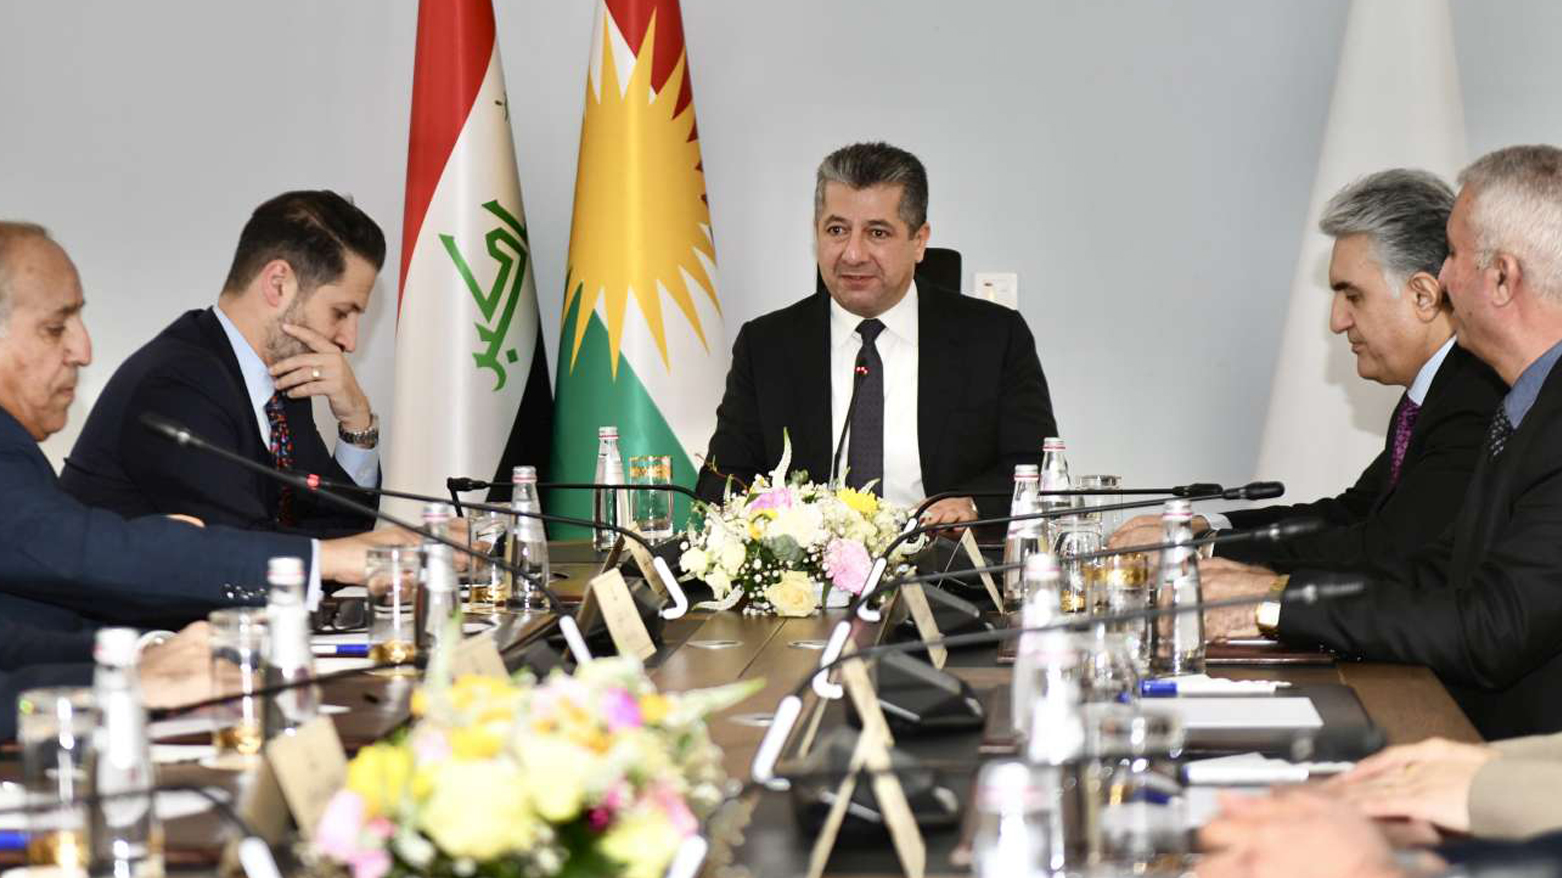 PM Barzani, Deputy PM Talabani, Minister of Interior and other Senior officials attended a meeting in Halabja. (Photo: KRG)